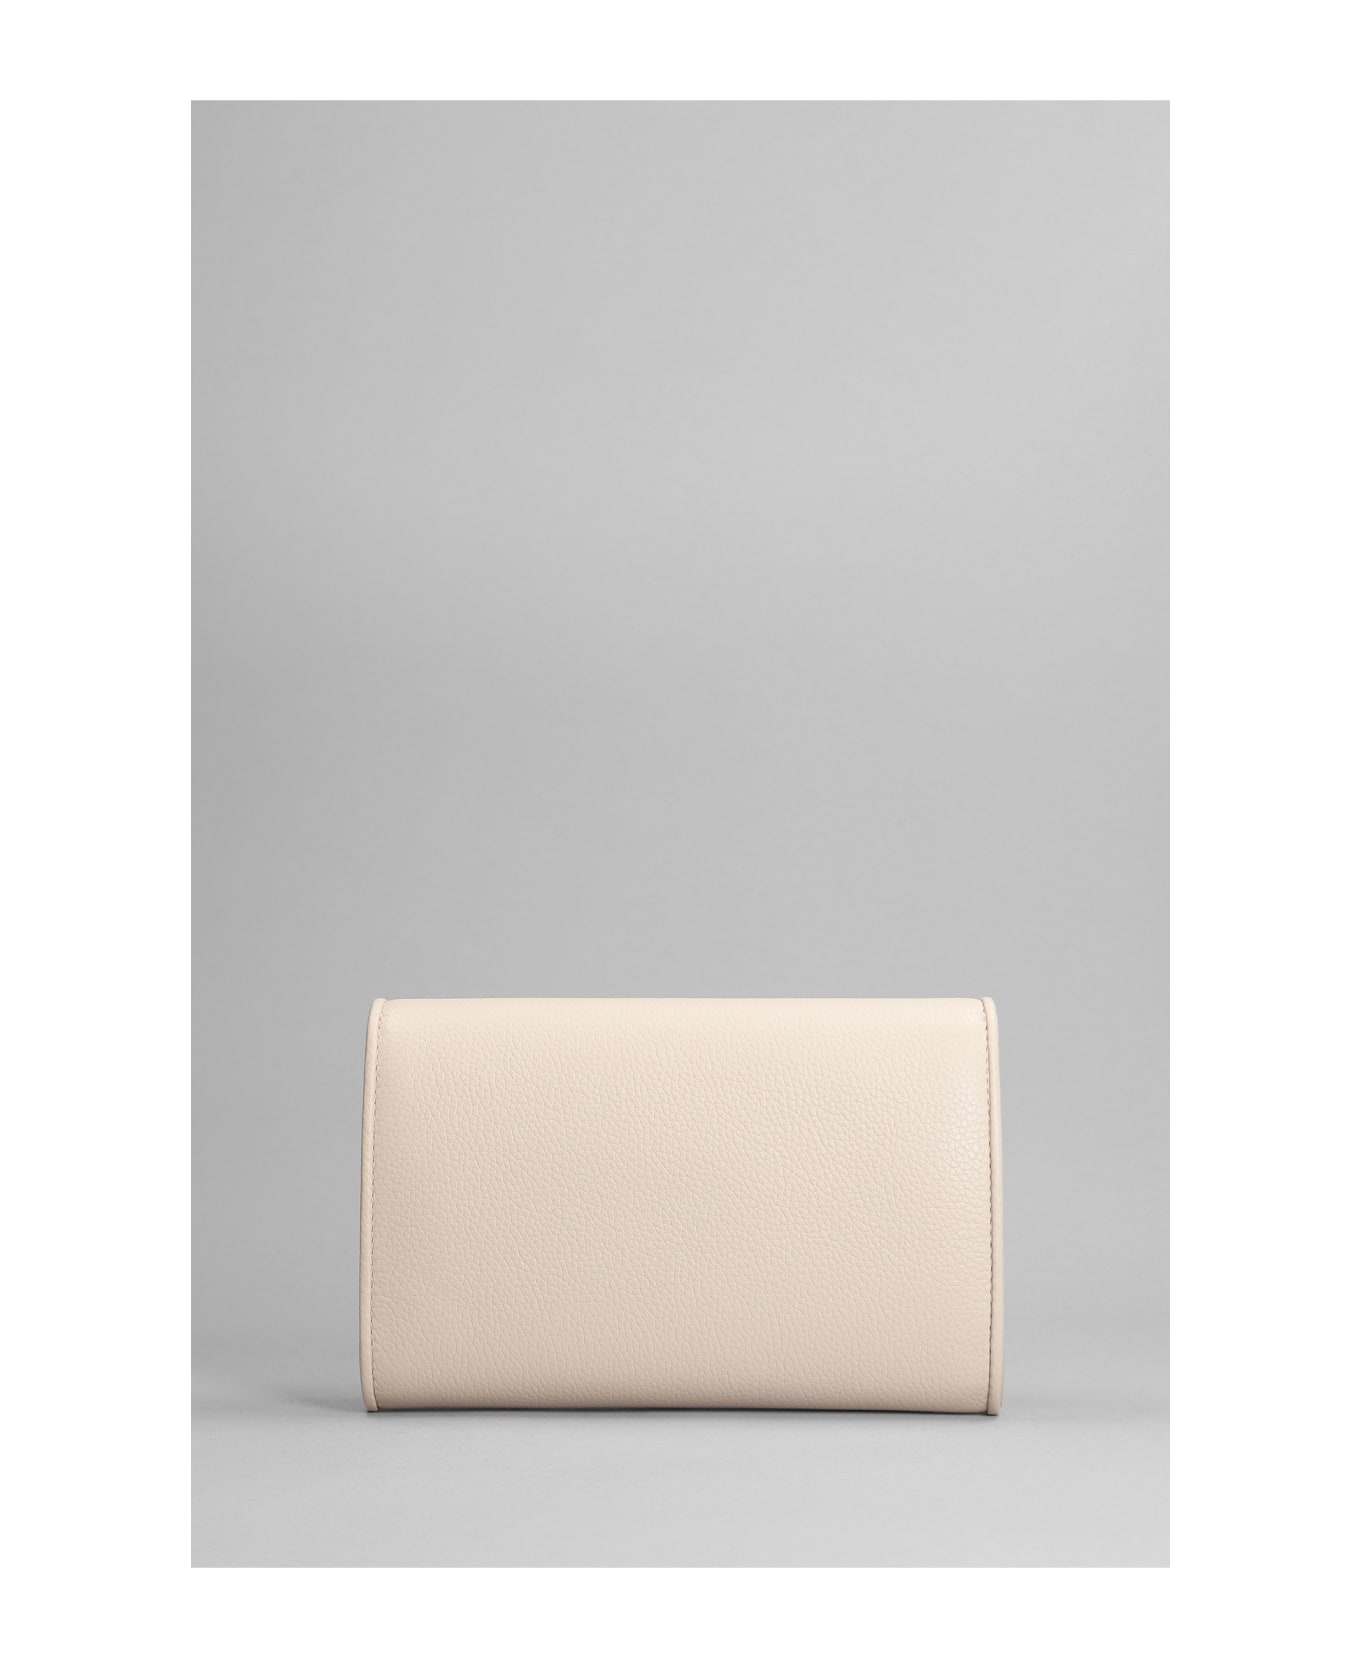 Christian Louboutin Carasky Shoulder Bag In Powder Leather - powder クラッチバッグ